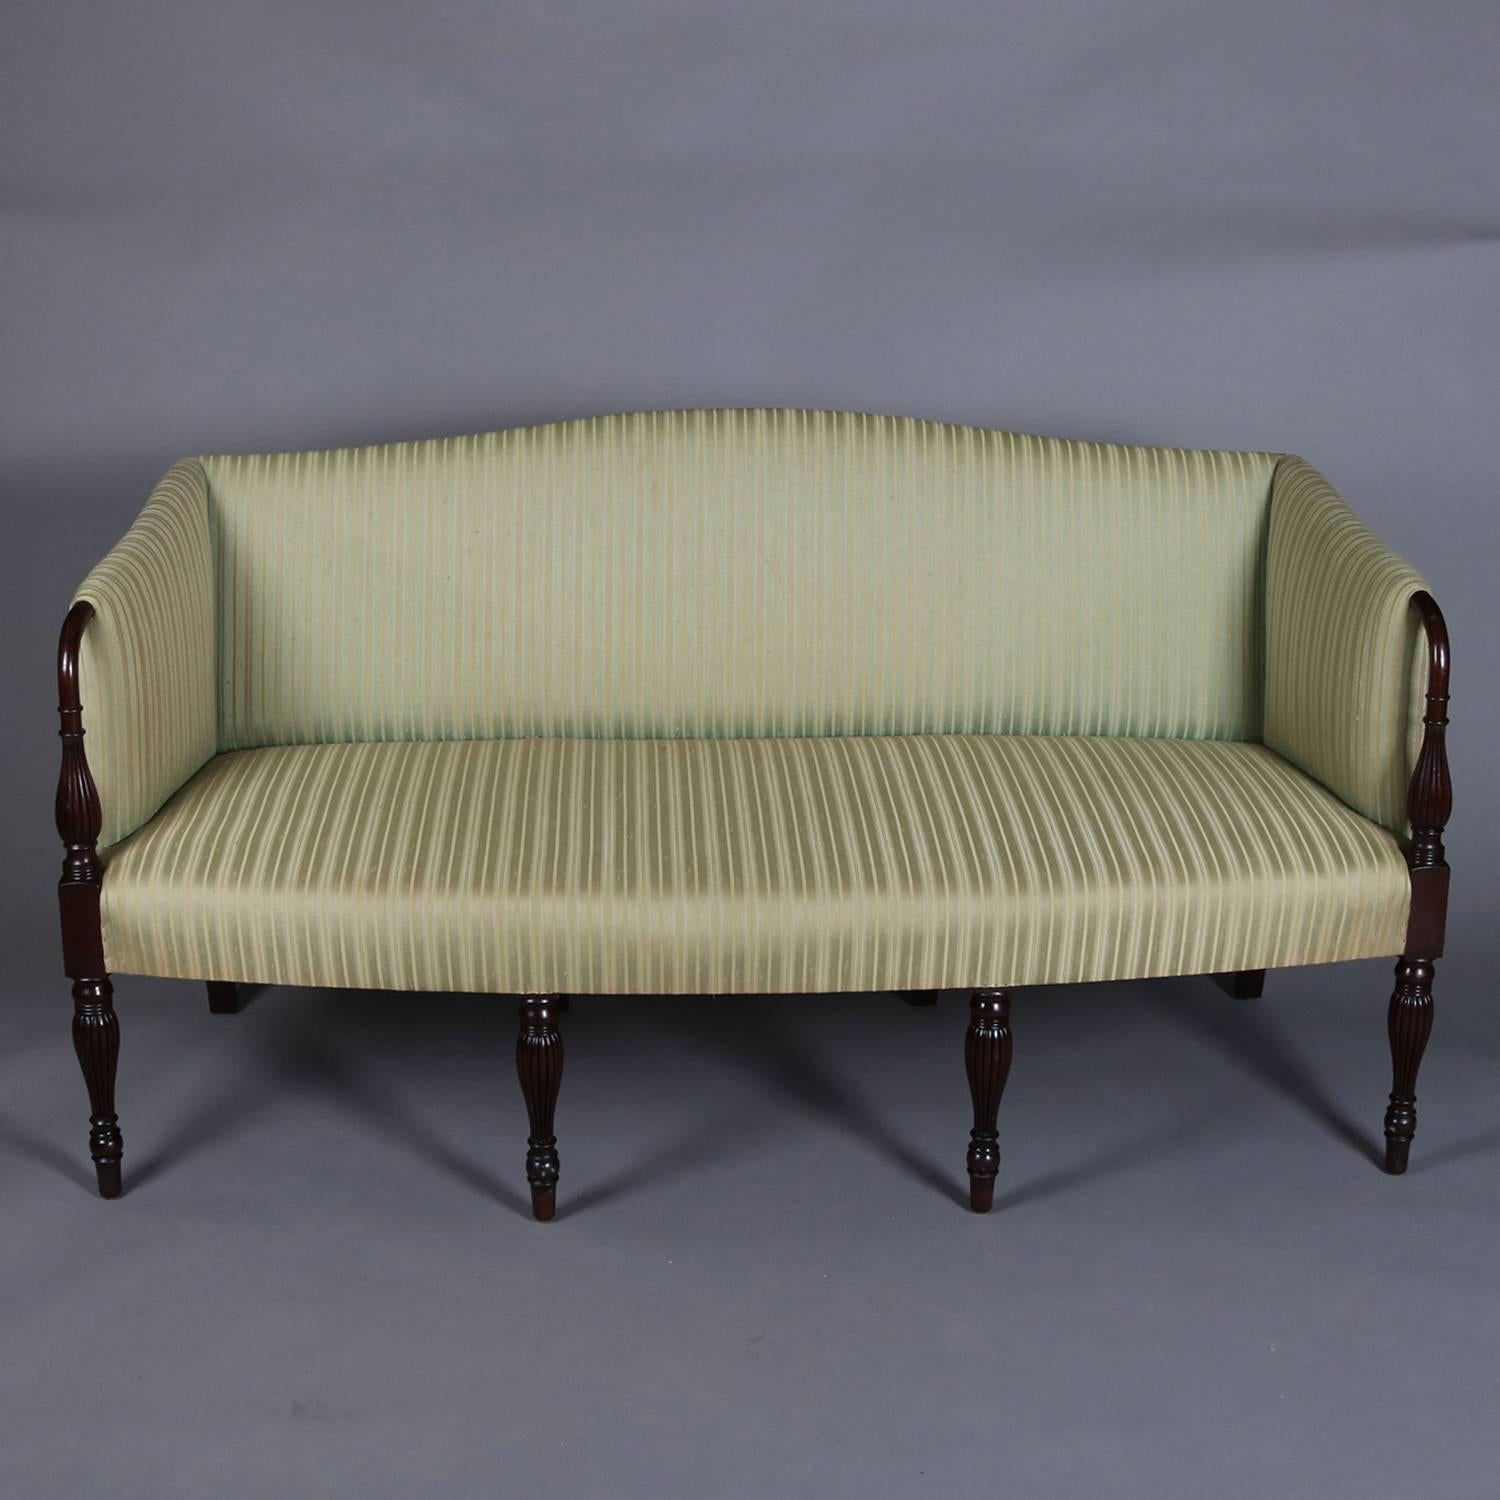 Antique Sheraton sofa features mahogany frame with camel back and seated on four turned legs, upholstered seat, arms and back, 20th century

Measures - 35